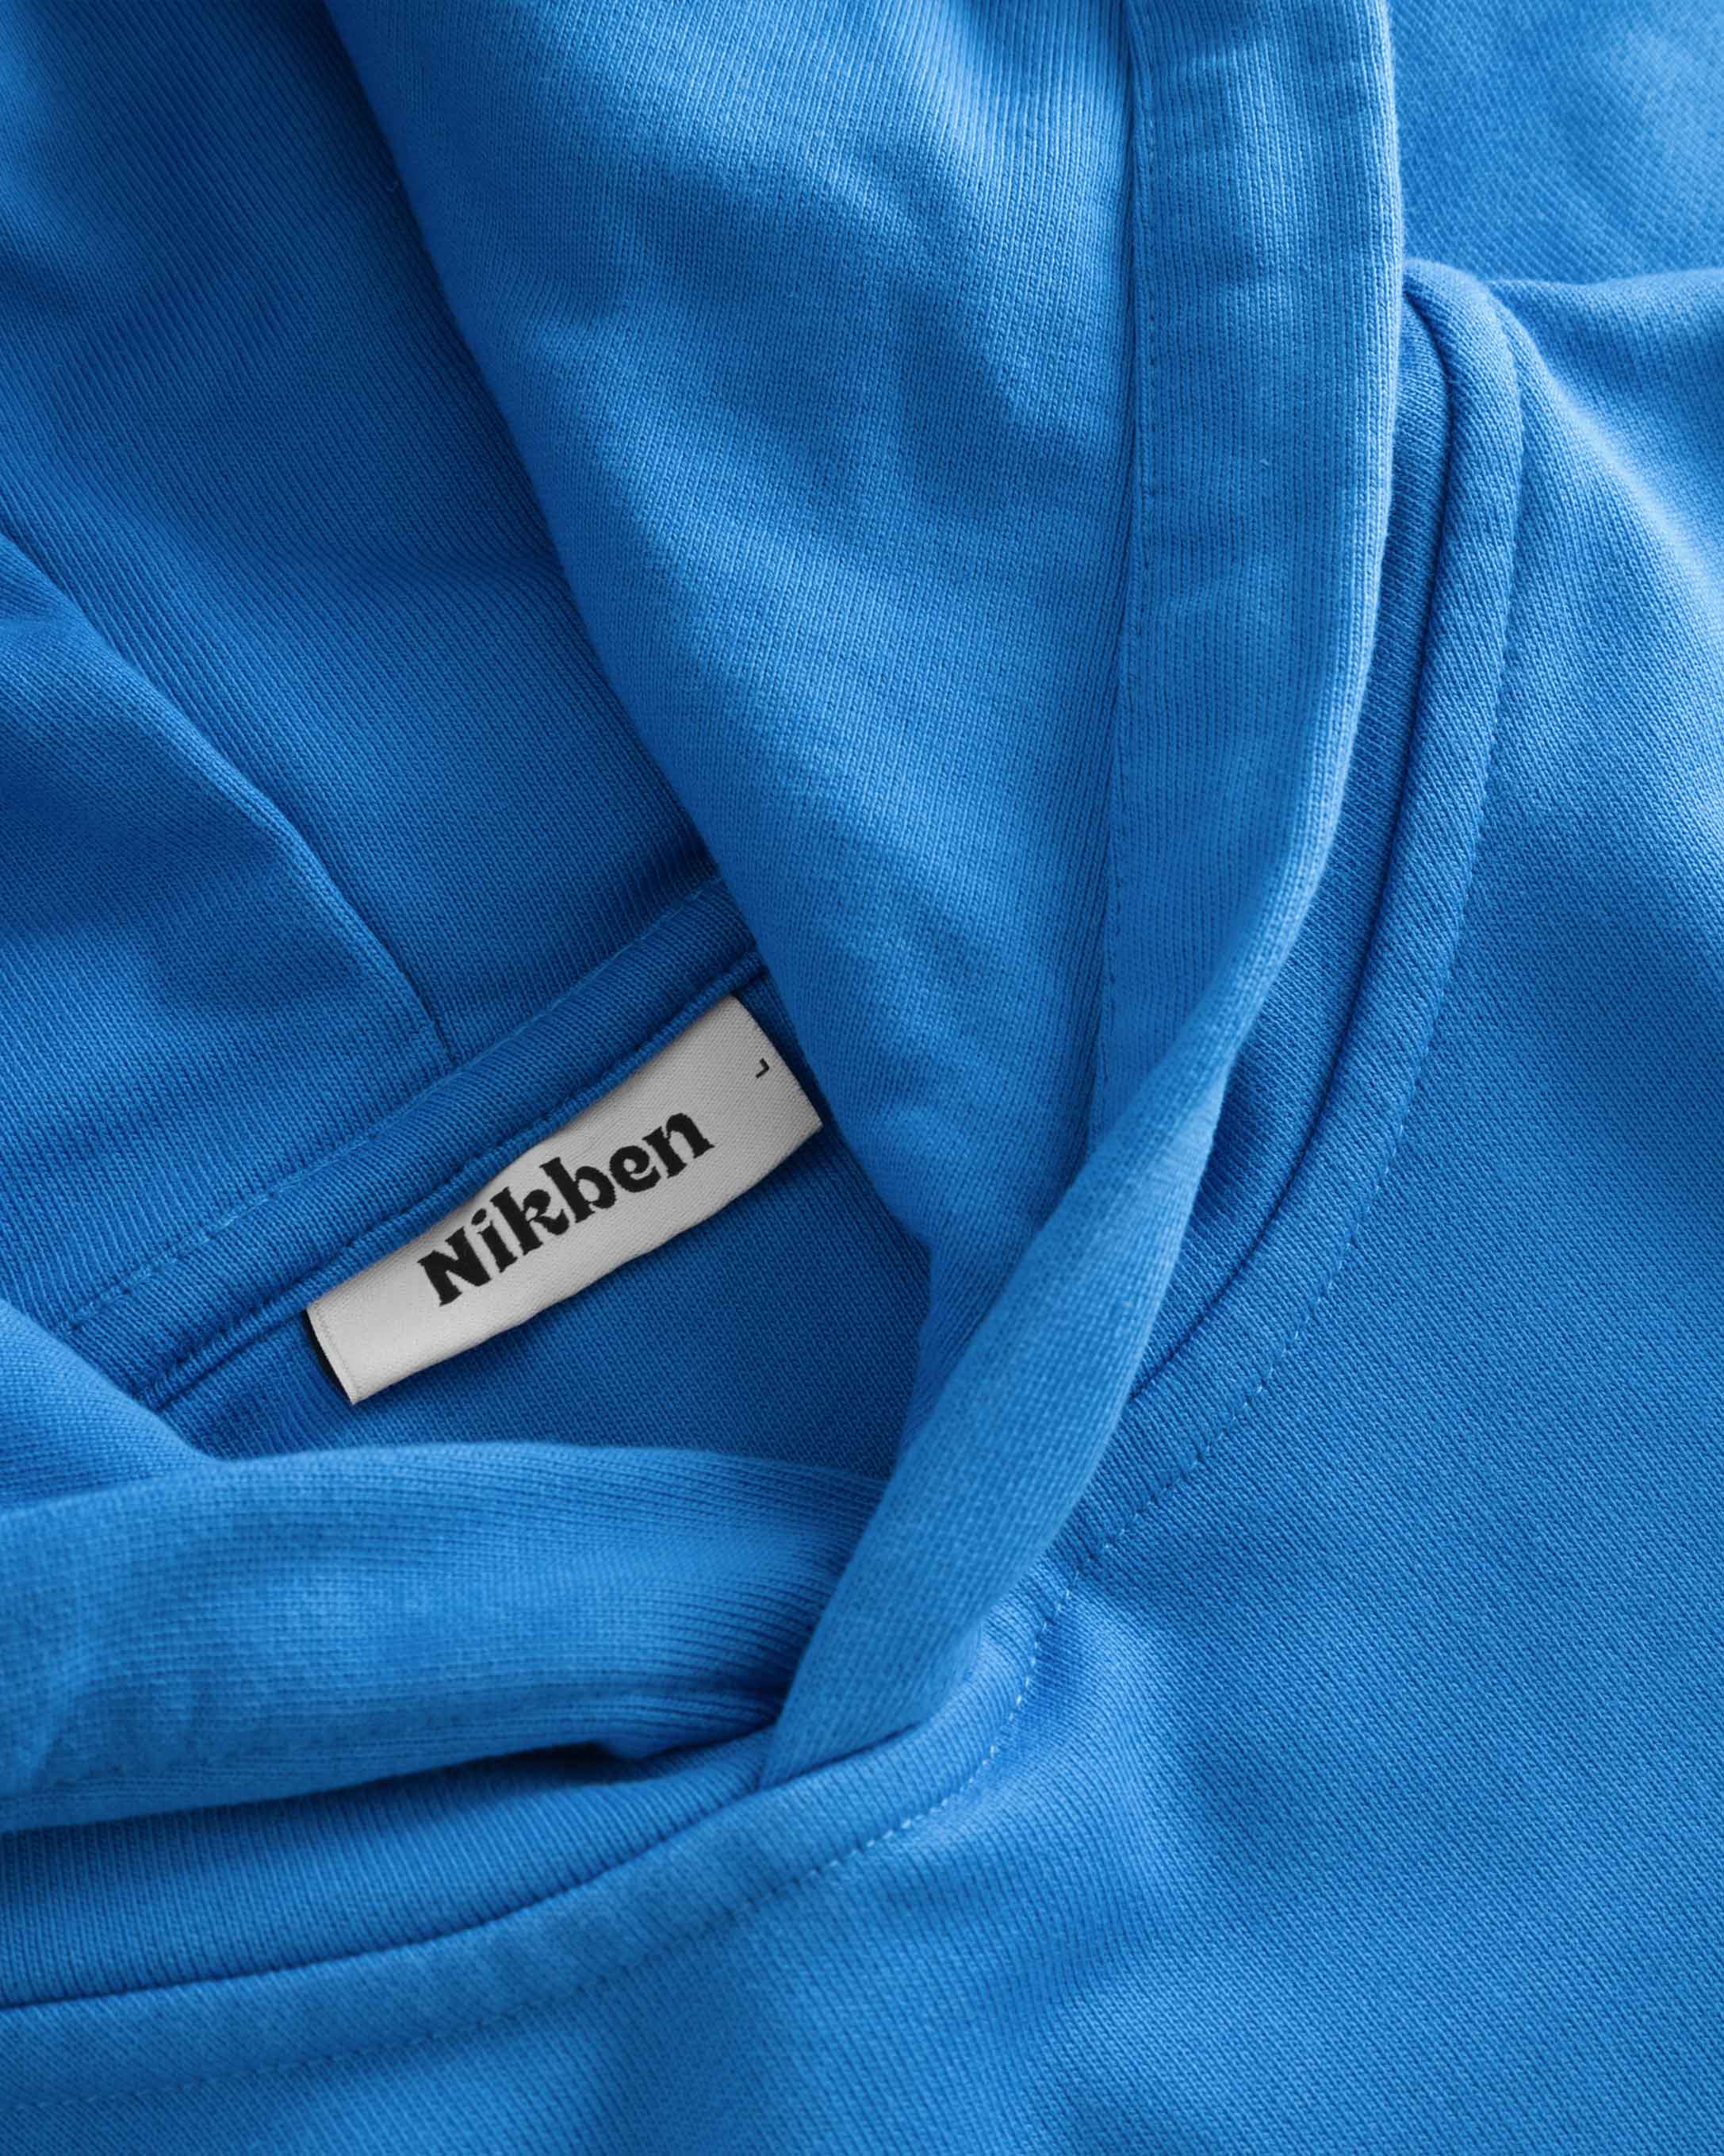 Close-up of stitchings on blue hoodie.